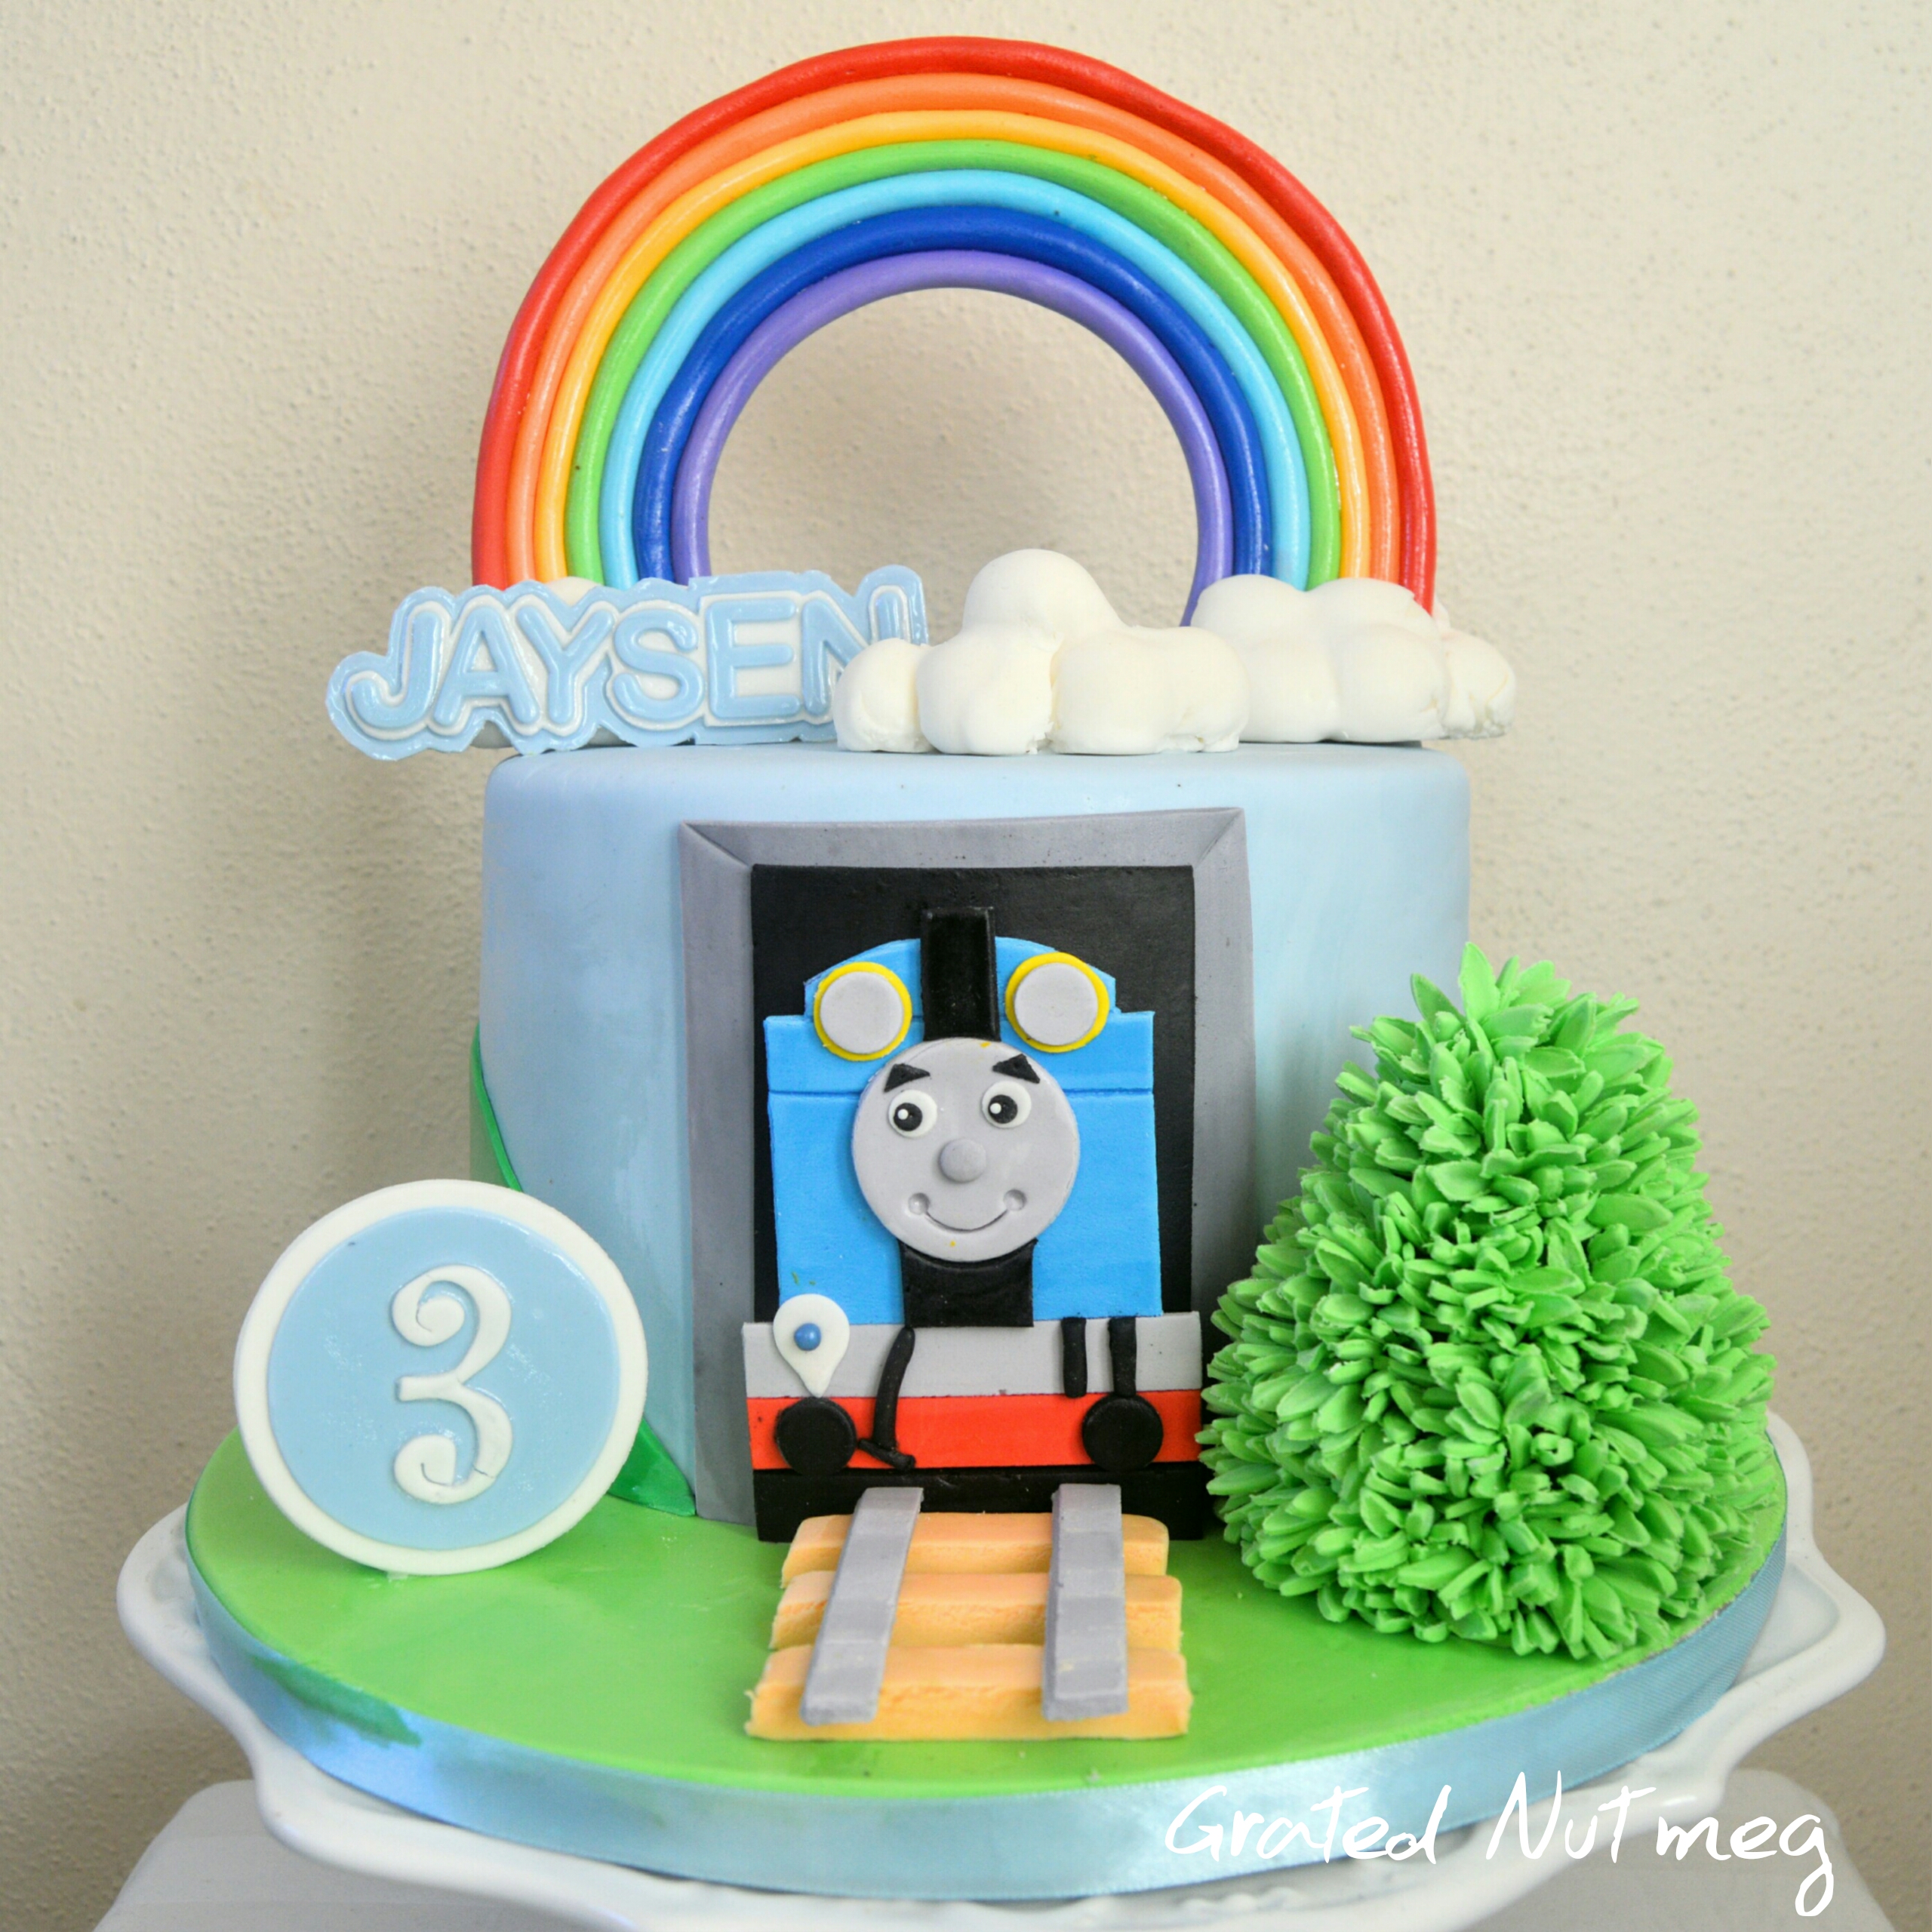 The Making of a Thomas the Tank Engine Cake